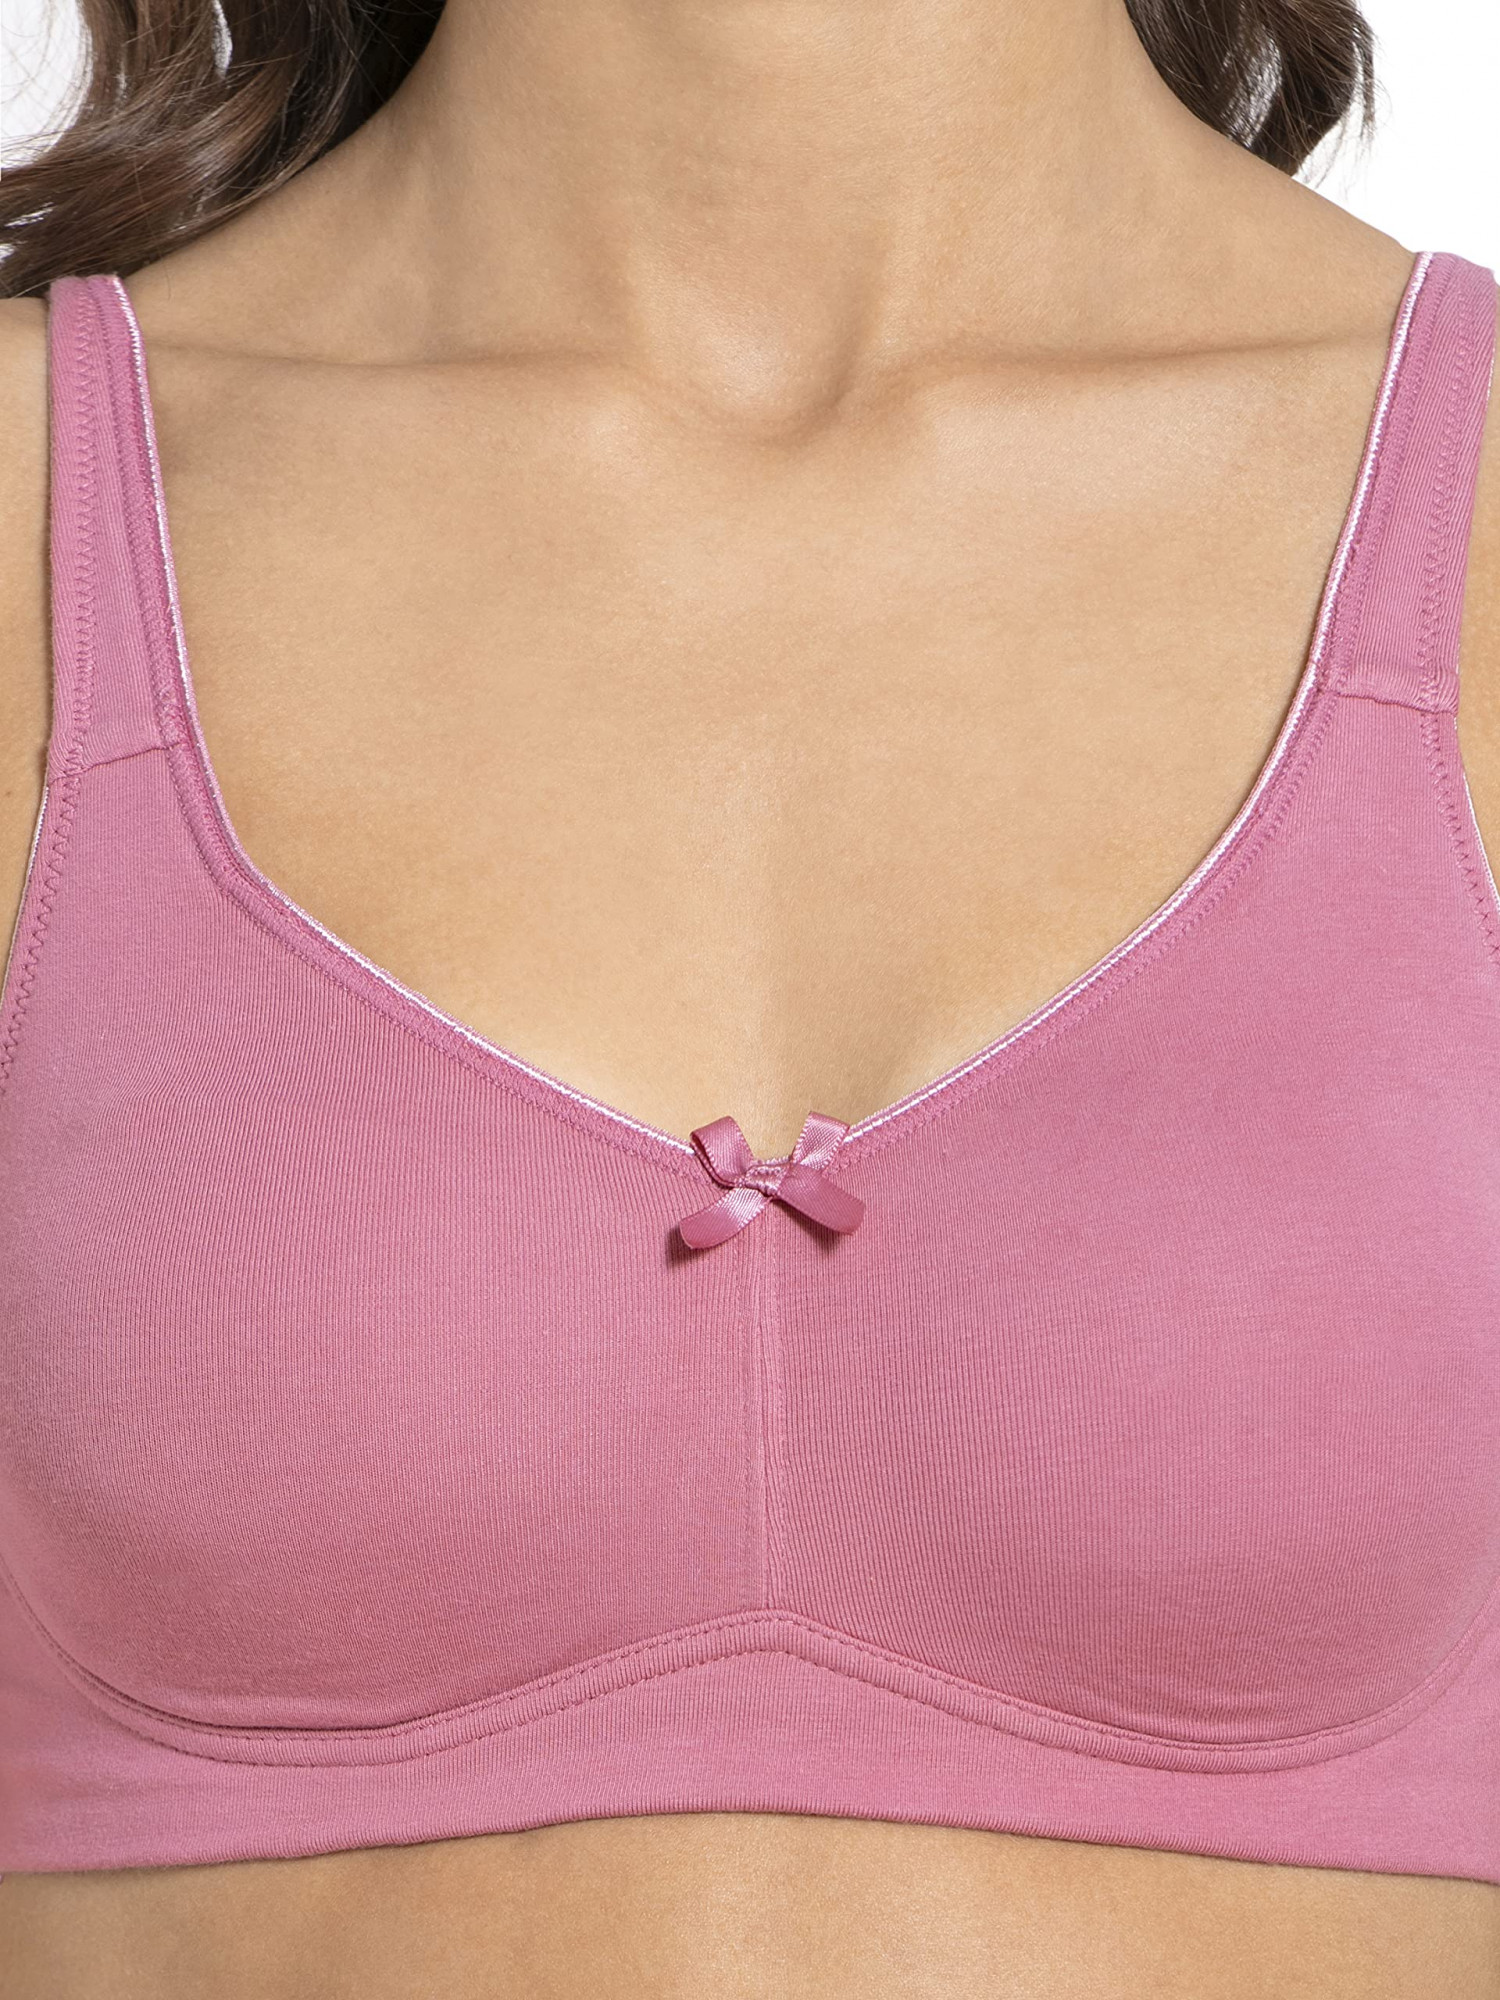 Enamor A039 Everyday stretchable cotton T-shirt Bra for women - Padded,  non-wired & medium coverage | Available in solids & prints(A039-Trailing